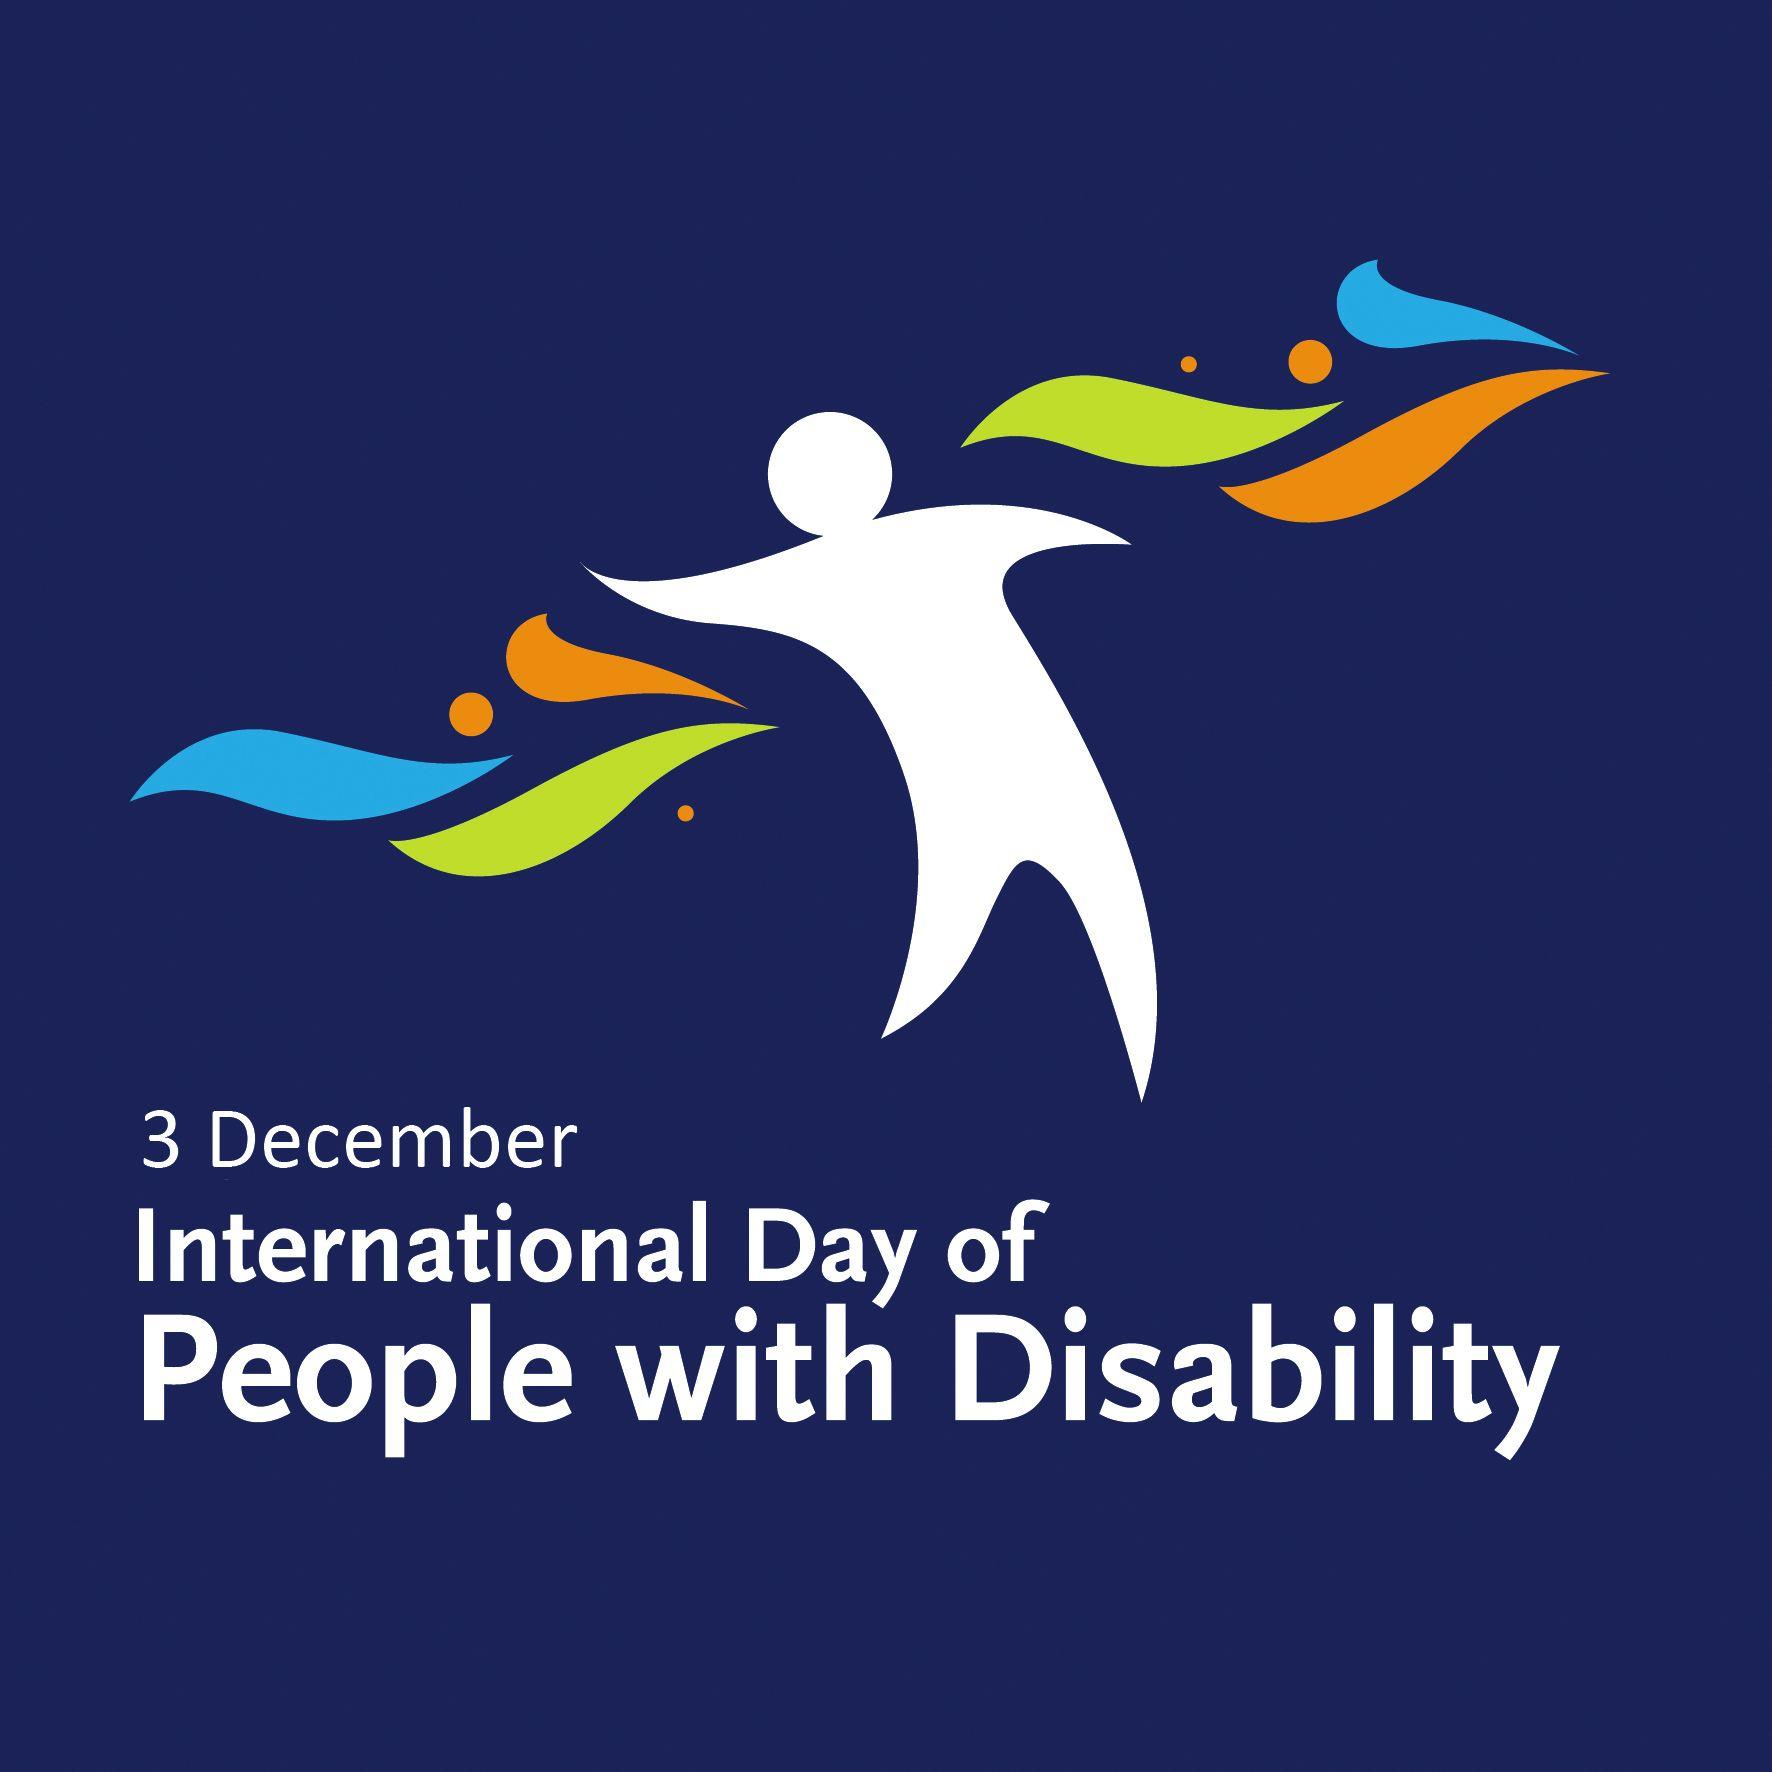 PWD Logo - Logo – International Day of People with Disability